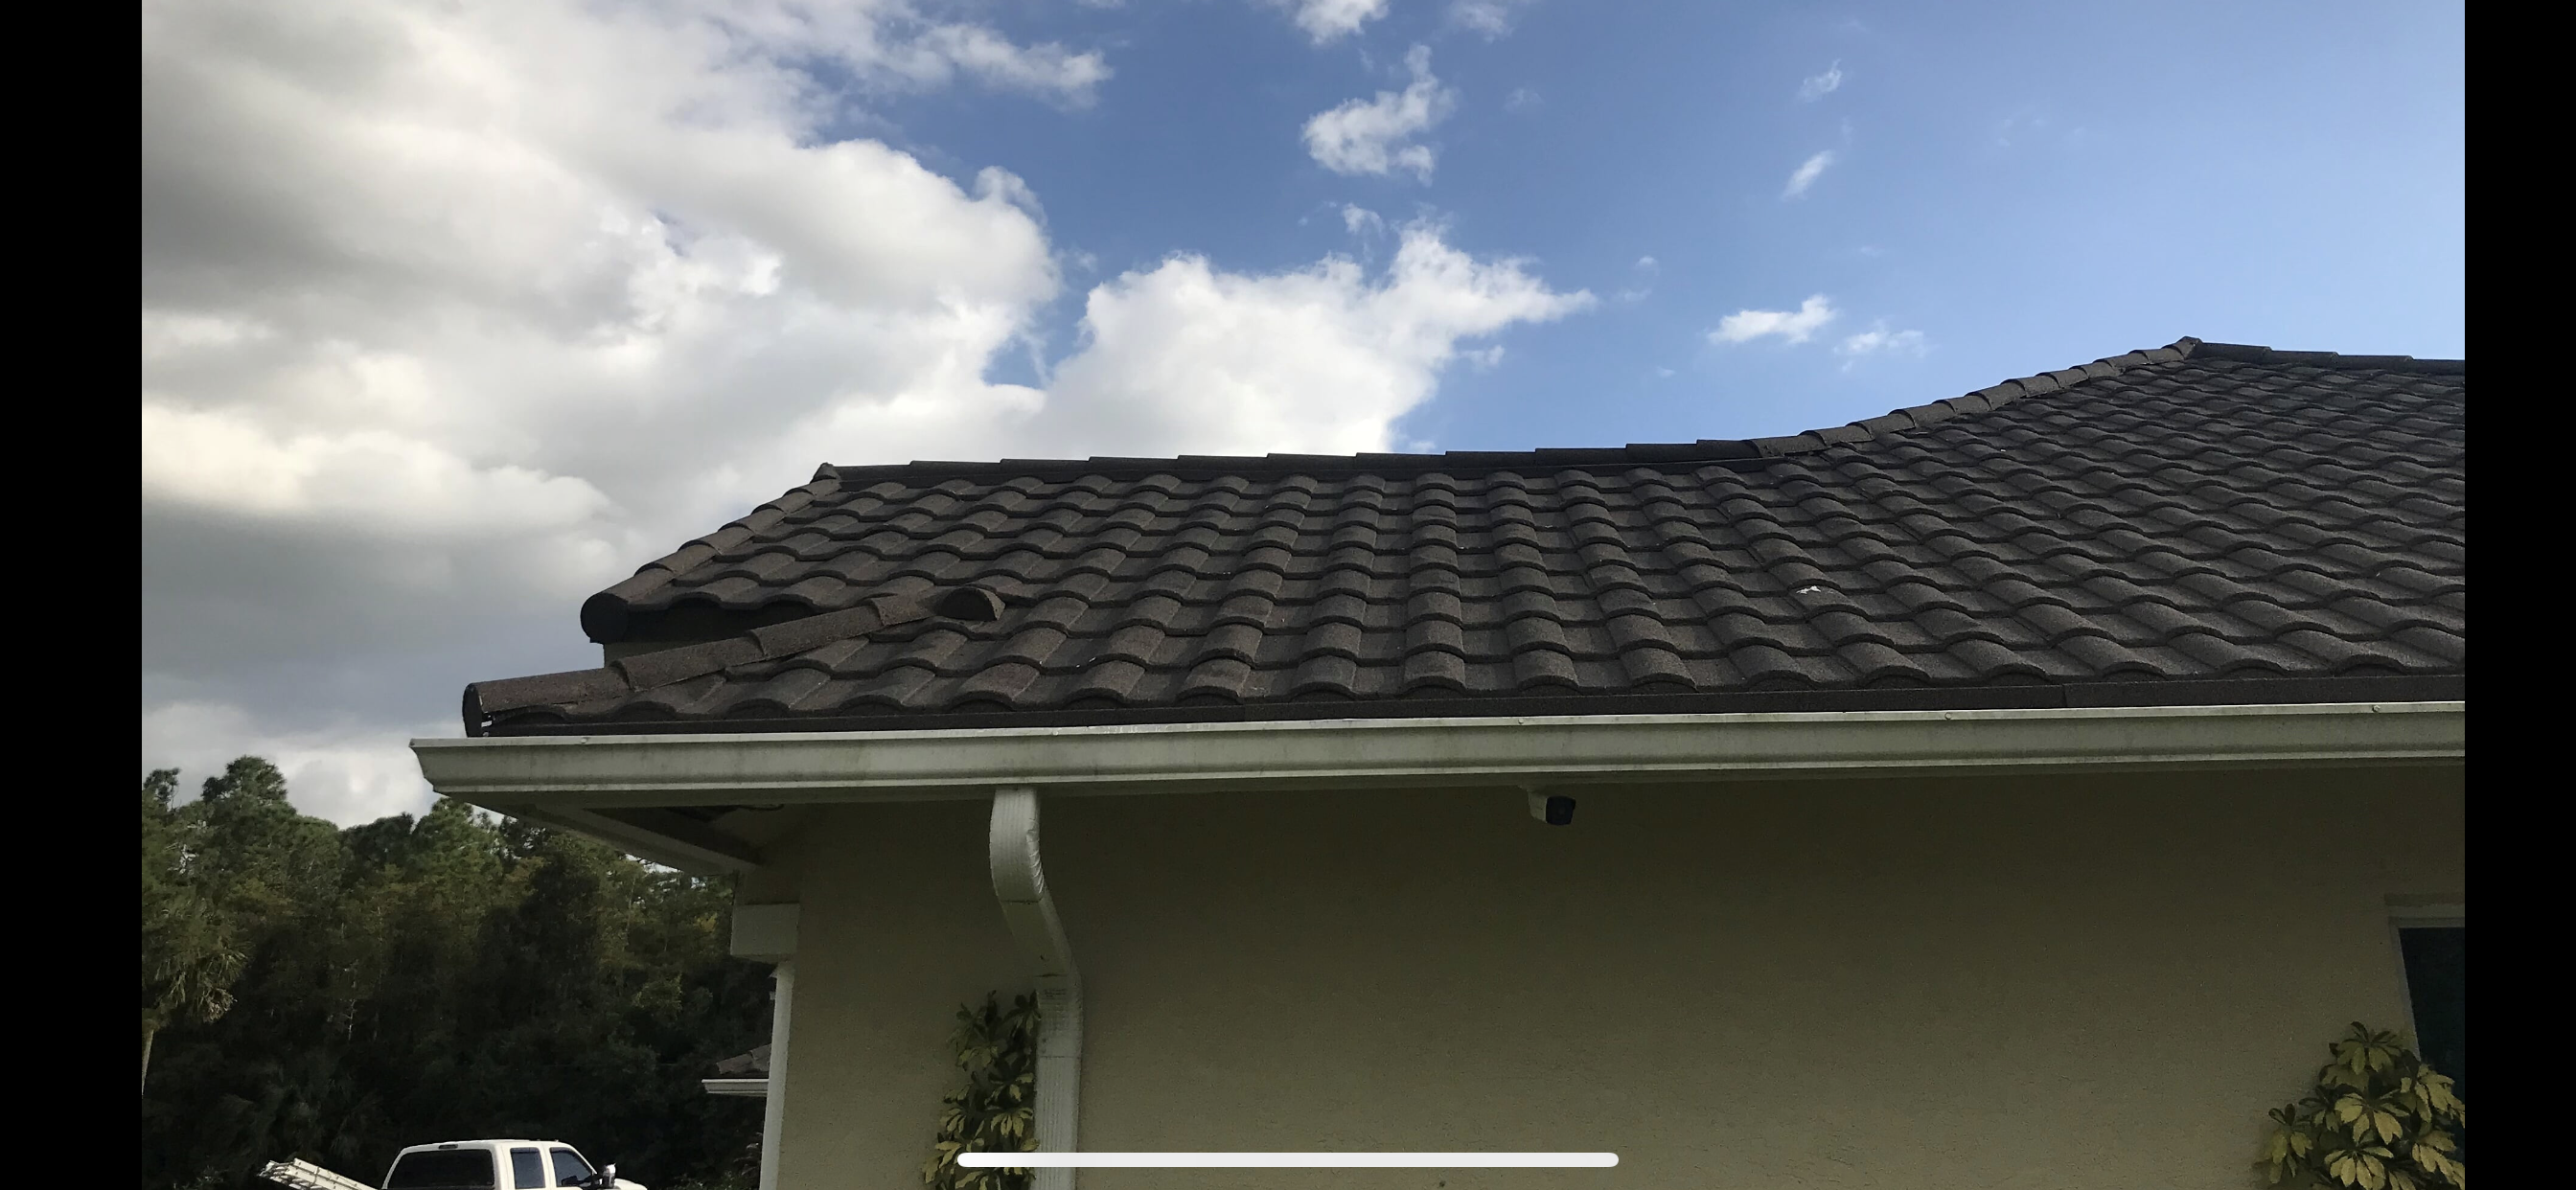 Roofing Experts, Inc. Tile Project Completed